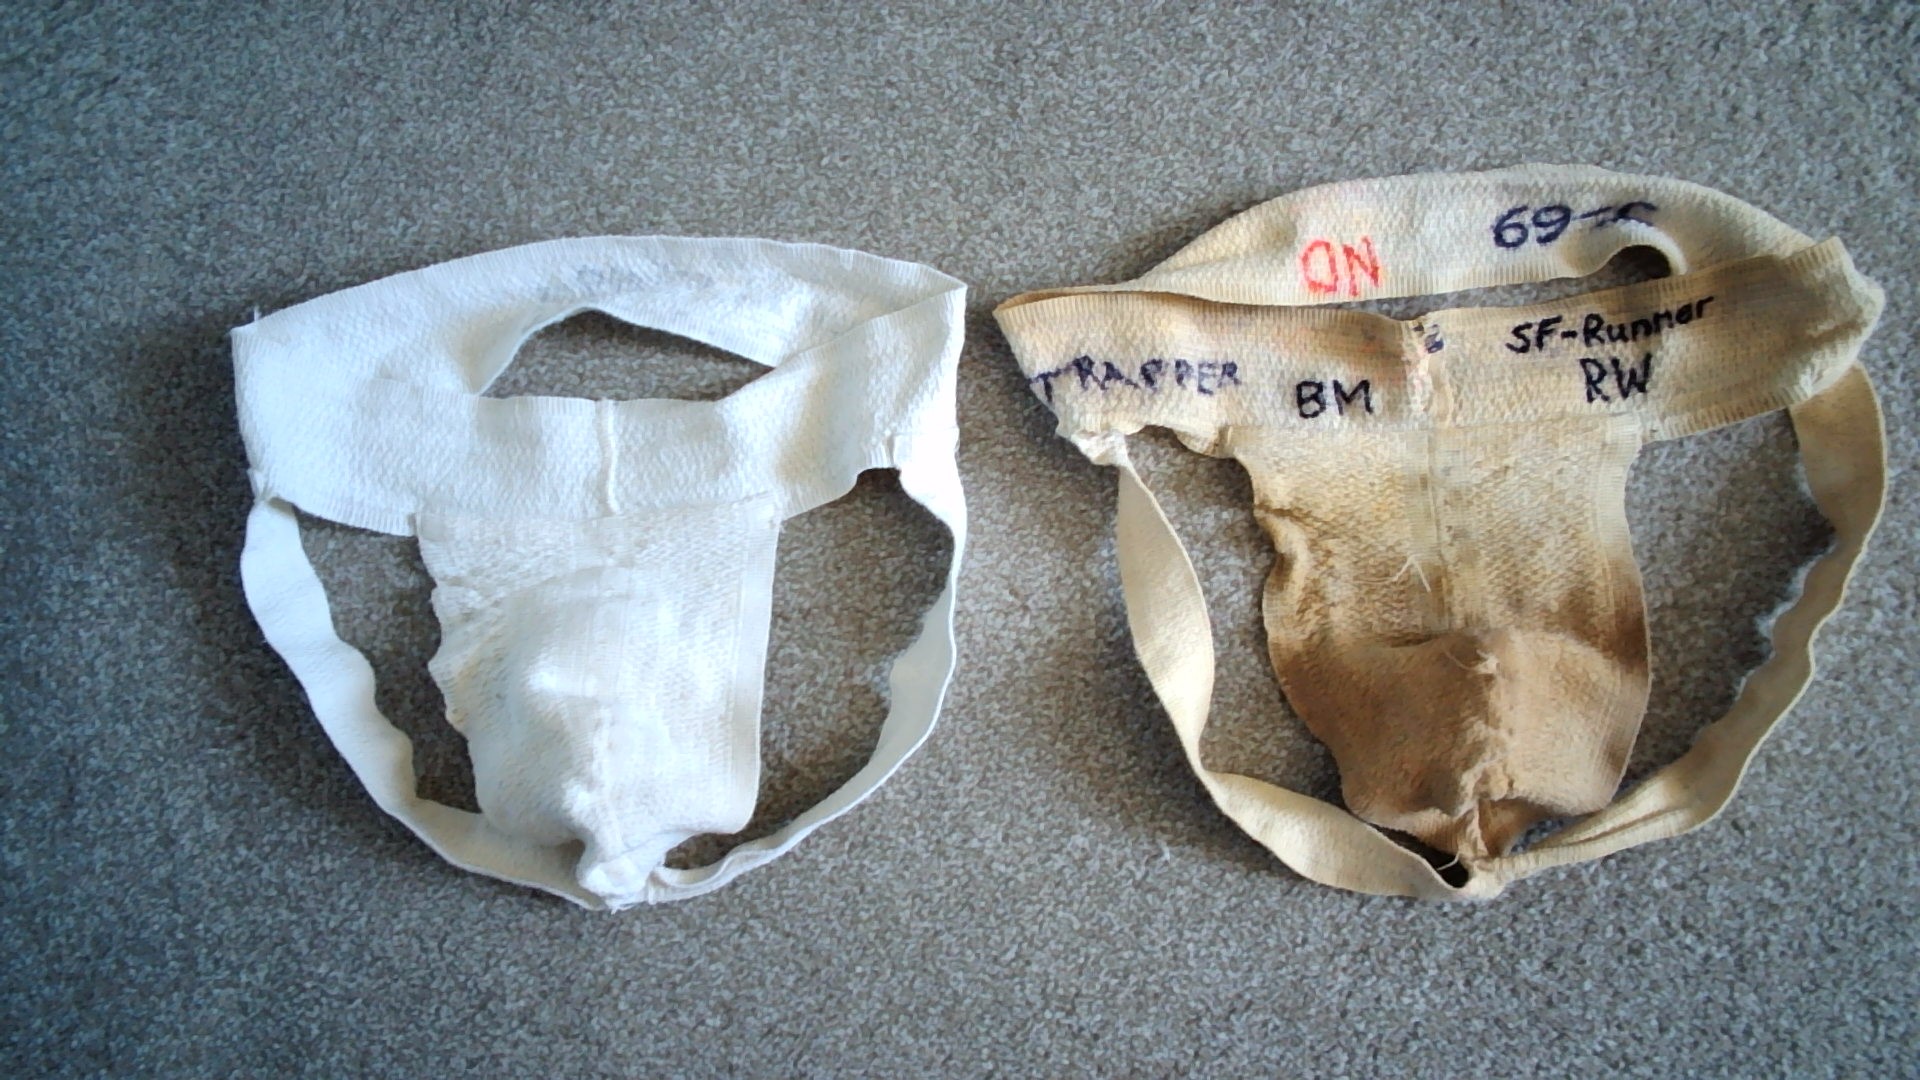 The contrast between the clean ex US Army jockstrap and the swapped item.